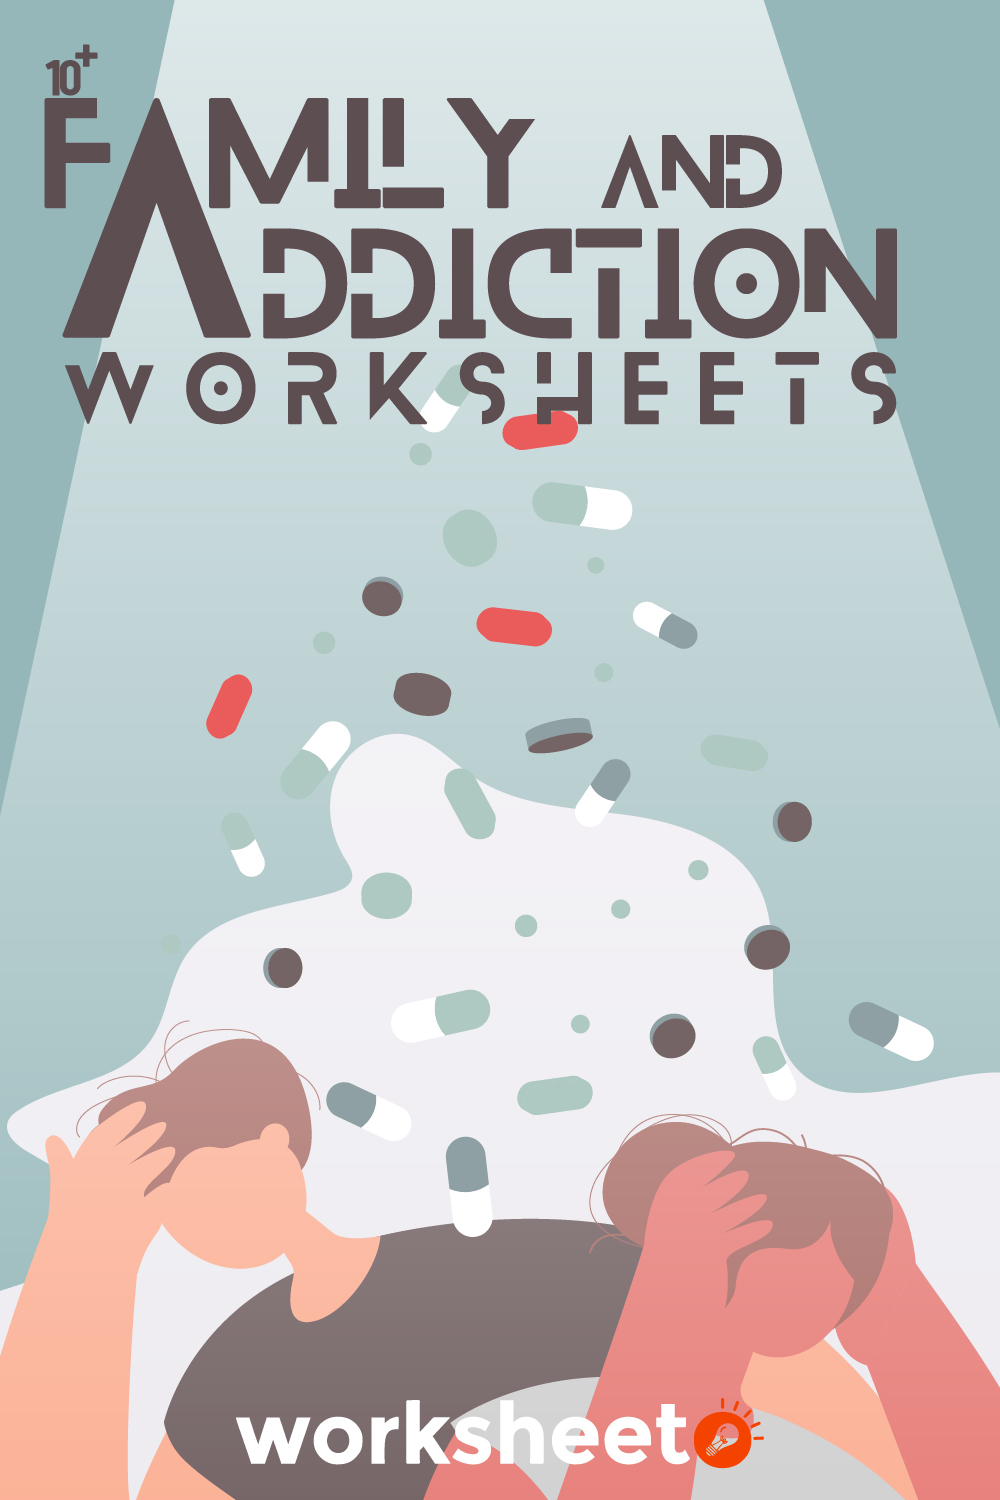 Family and Addiction Worksheets